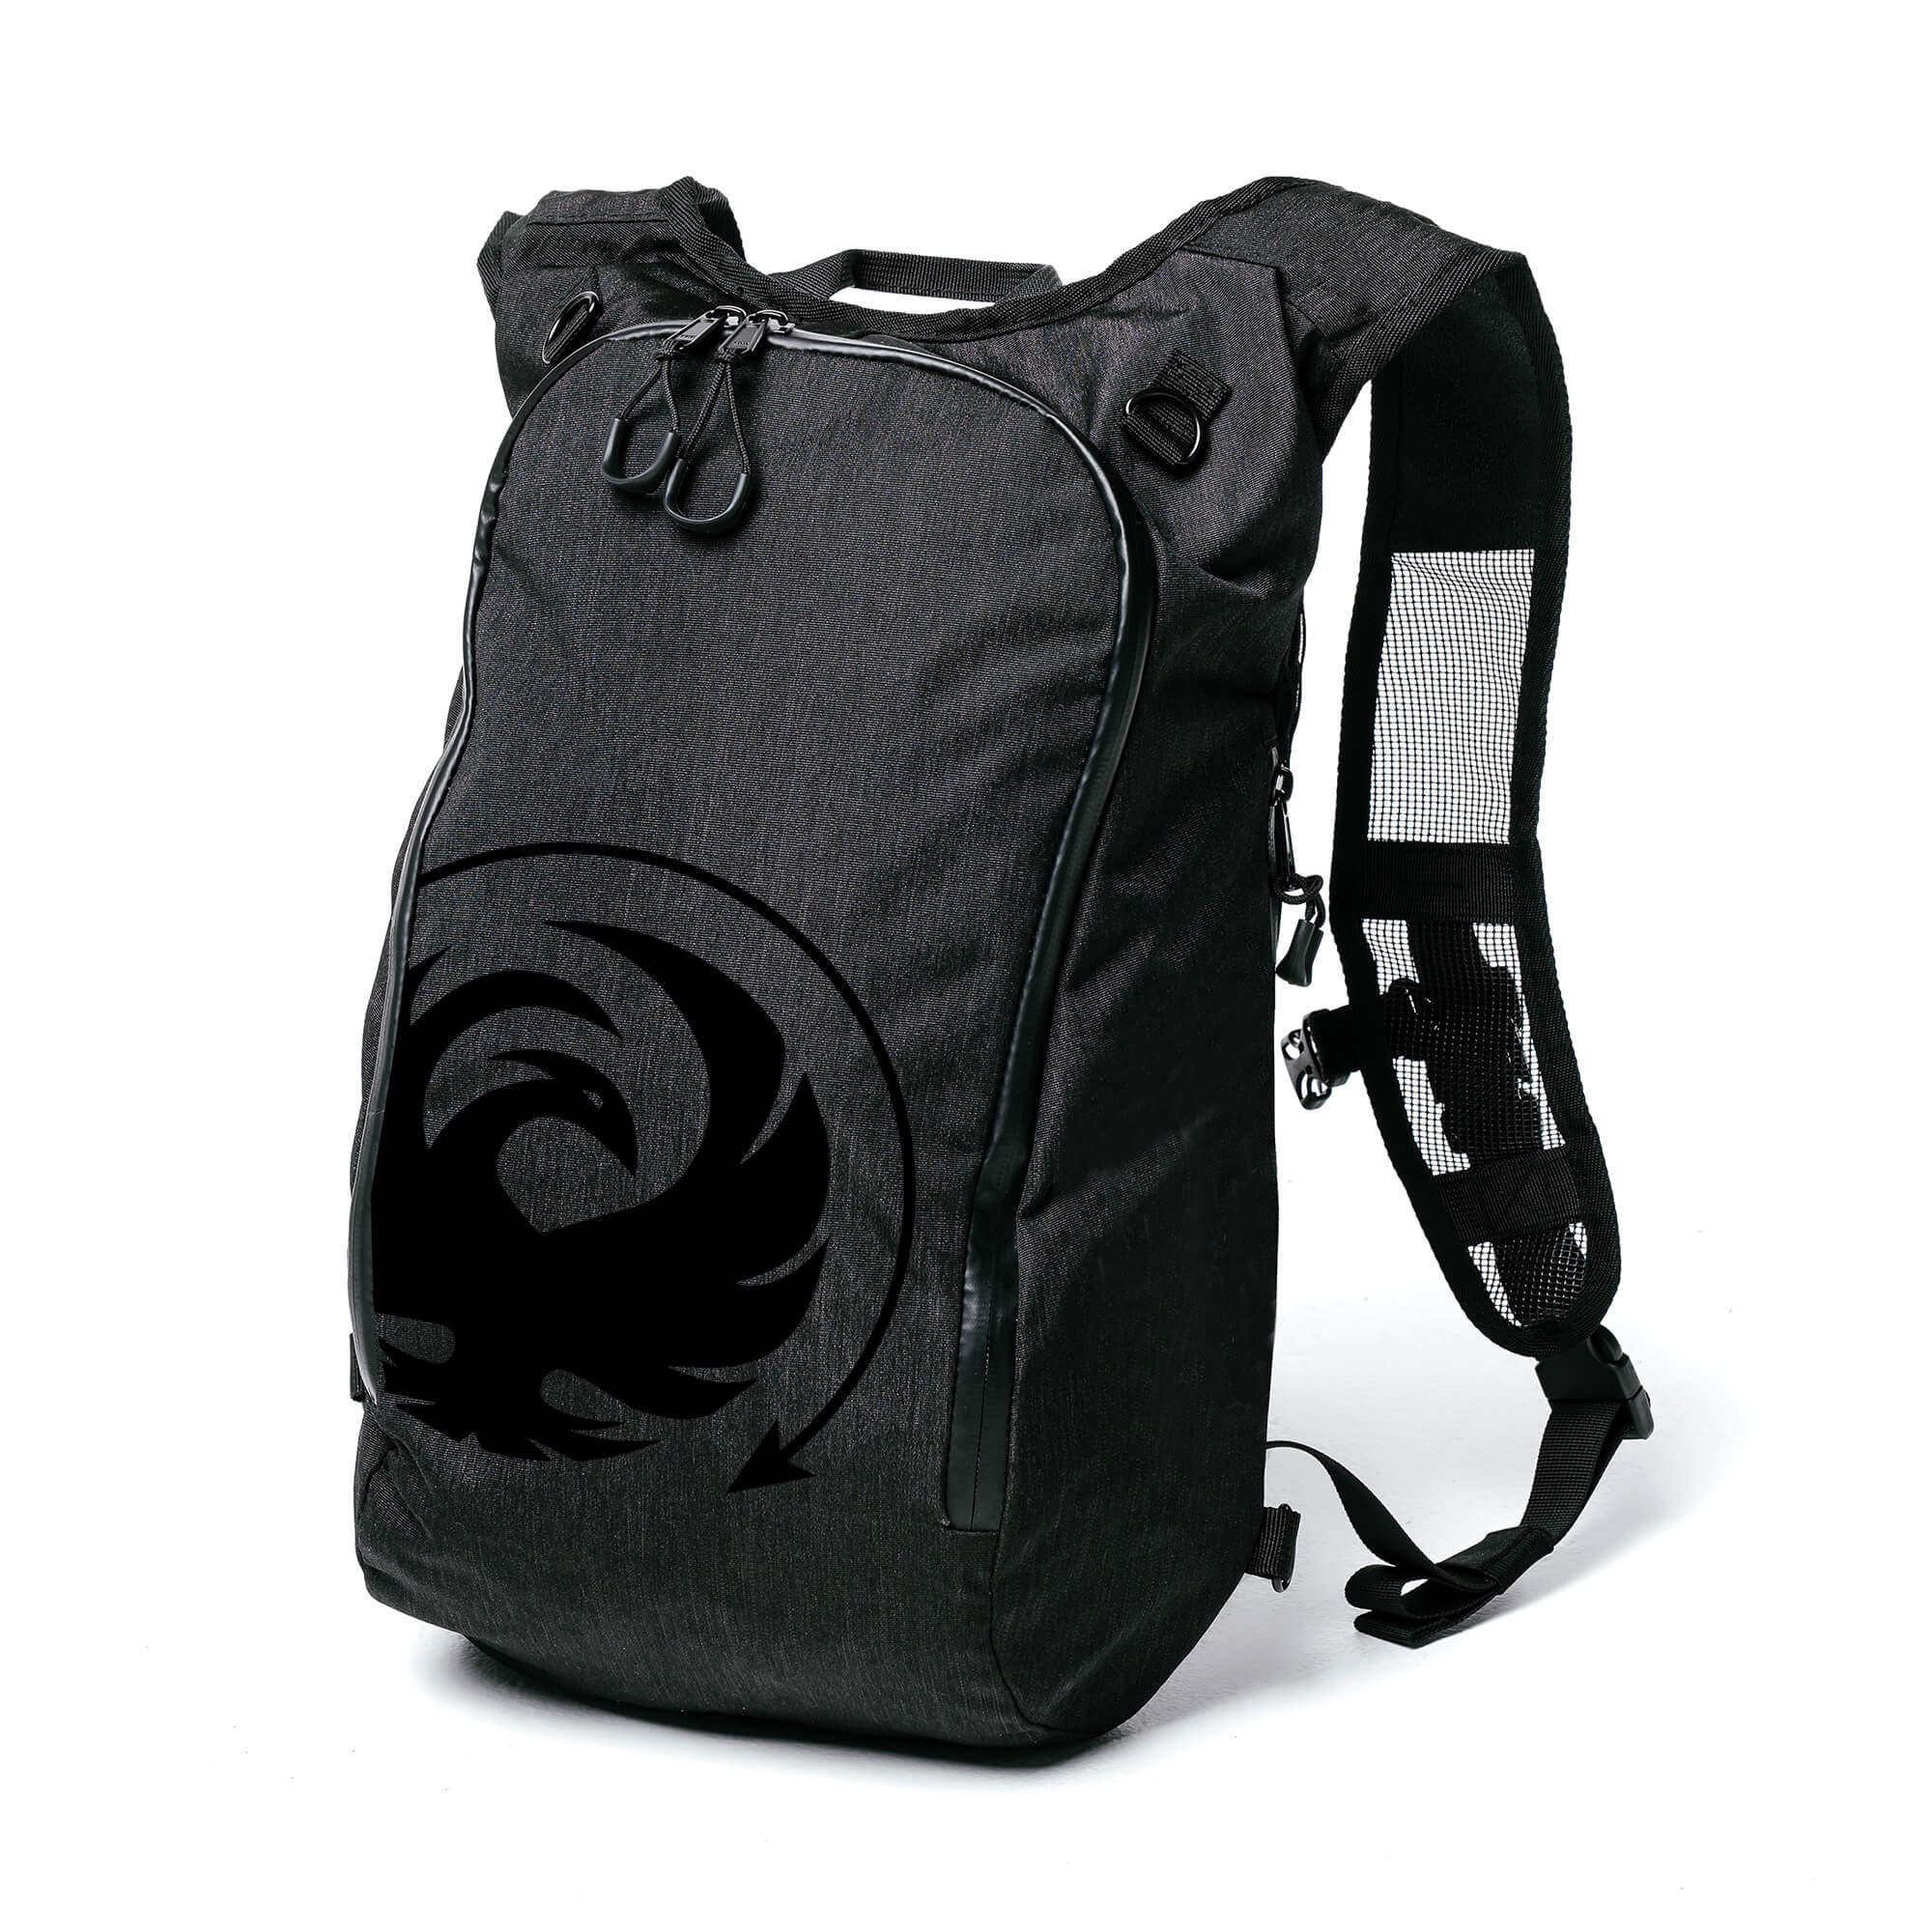 The Ashvault X Backpack 15L (PRESALE) - Flying Solo Gear Company